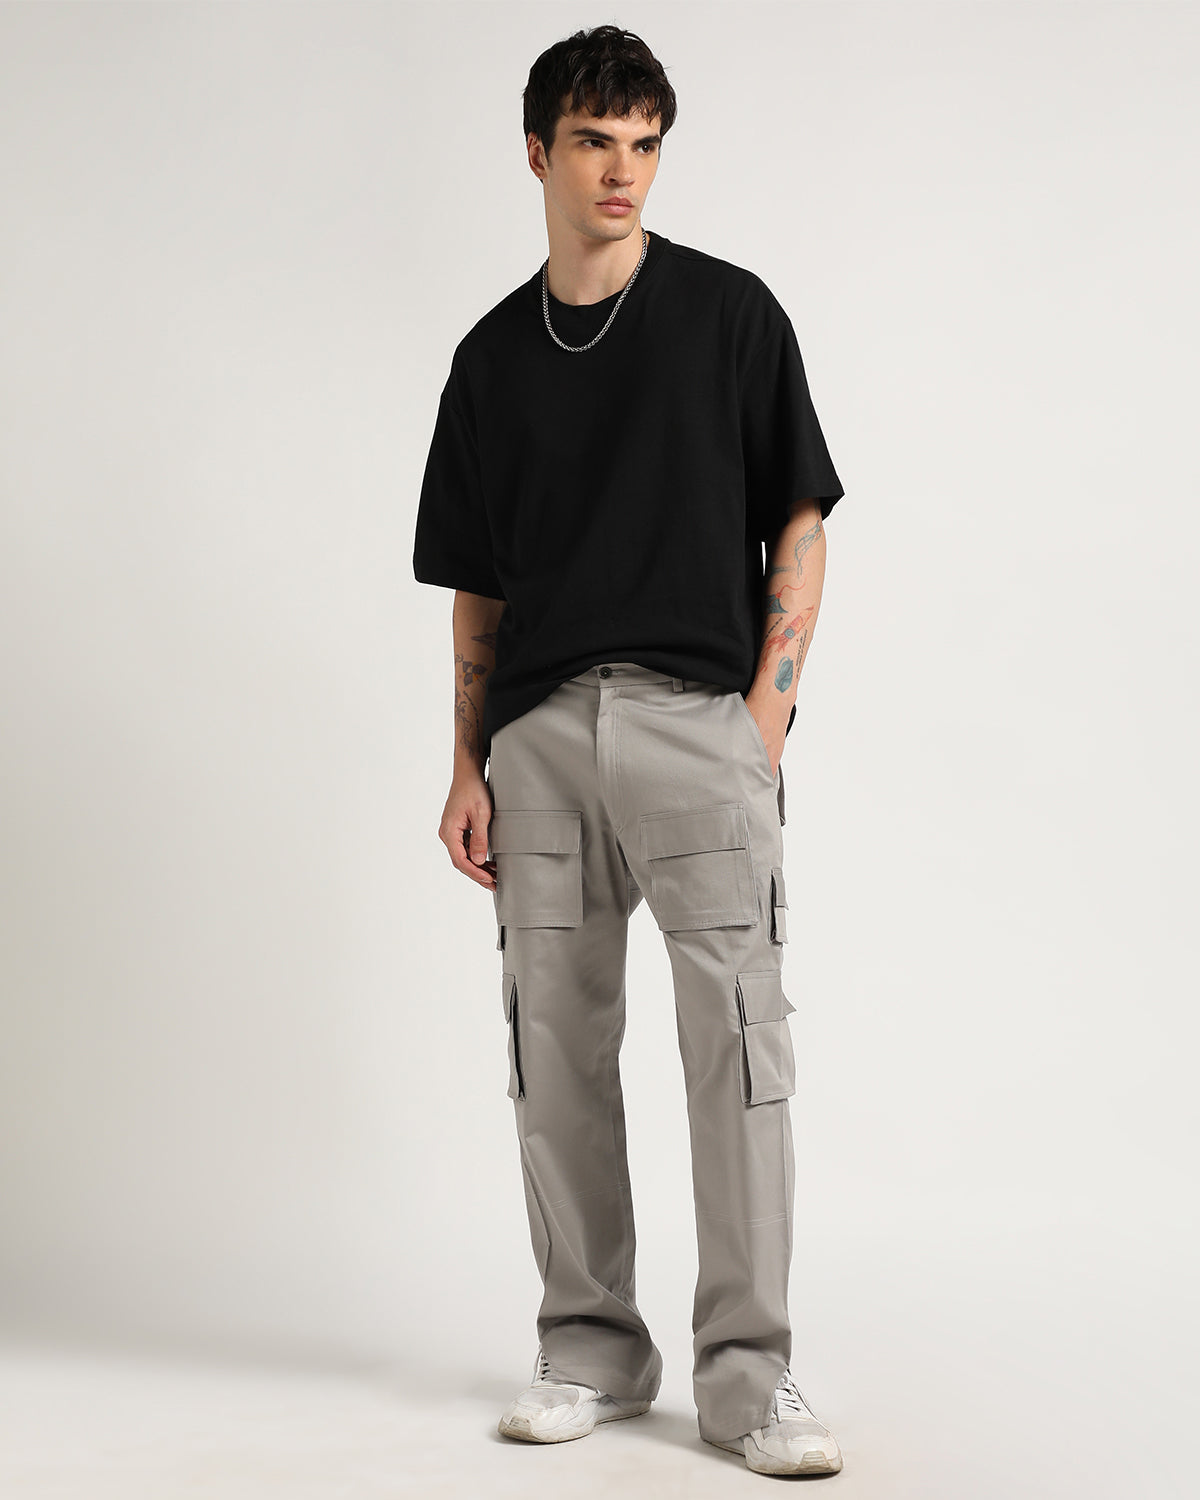 Biodegradable Grey 10 Pockets Cargo Pants With A Slit